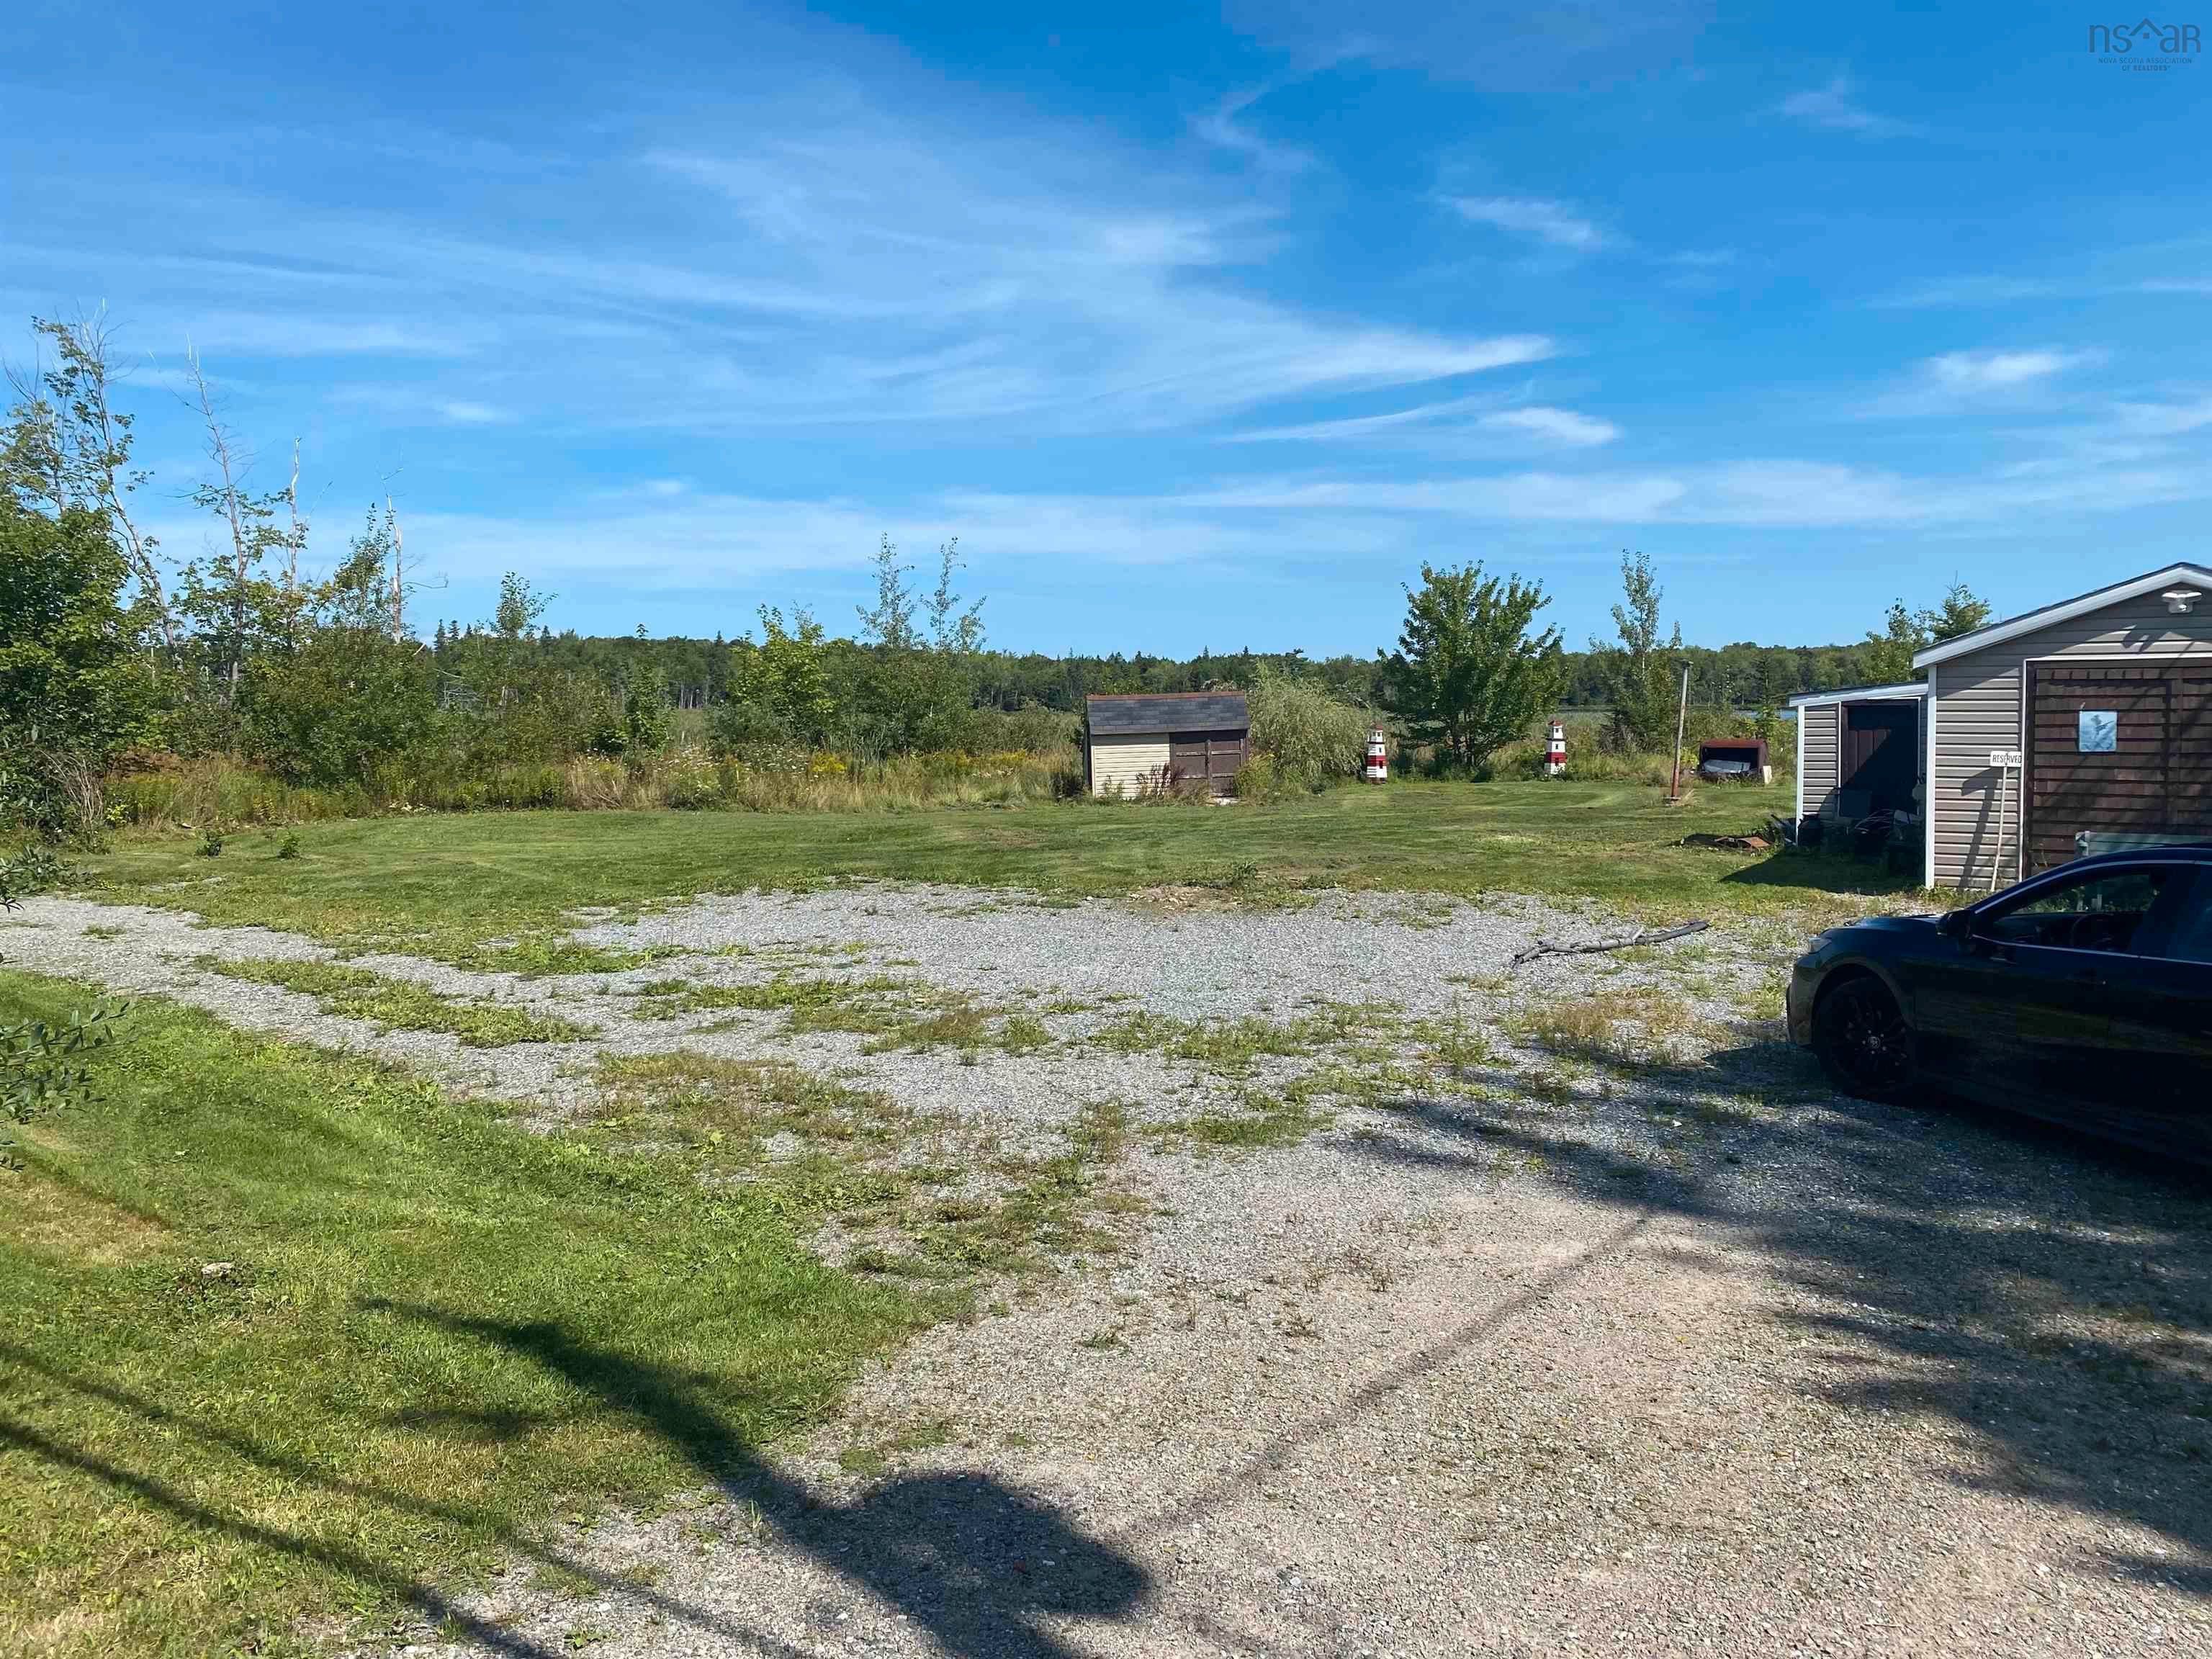 Main Photo: 216 Johnson Road in Georges River: 207-C.B. County Vacant Land for sale (Cape Breton)  : MLS®# 202221734